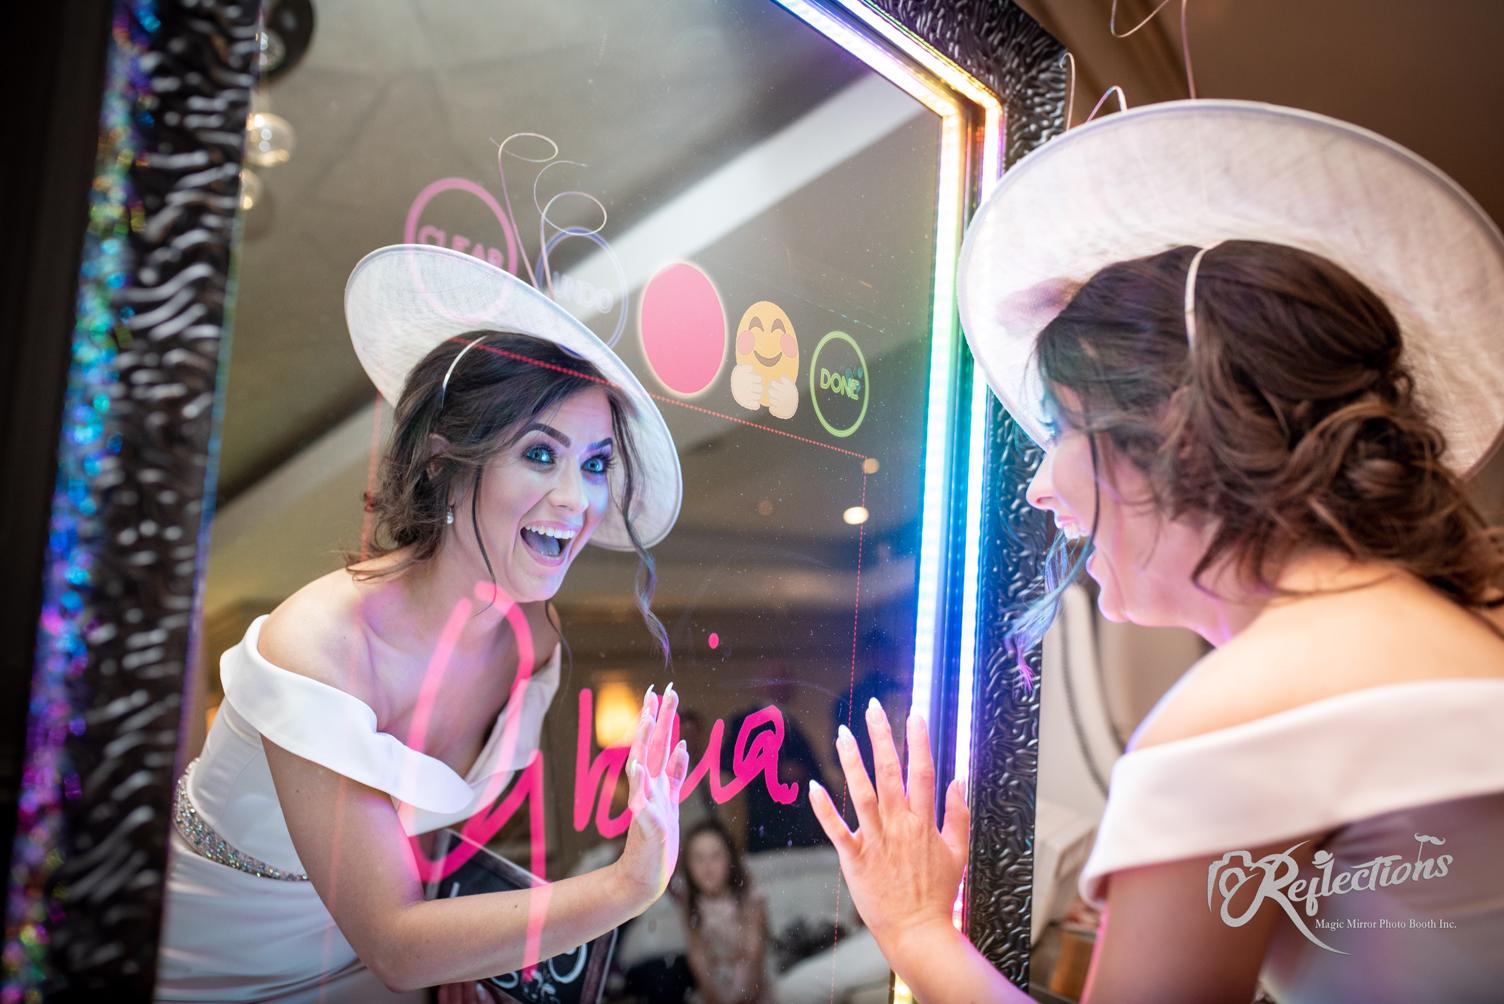 bride with hat signing image.jpg